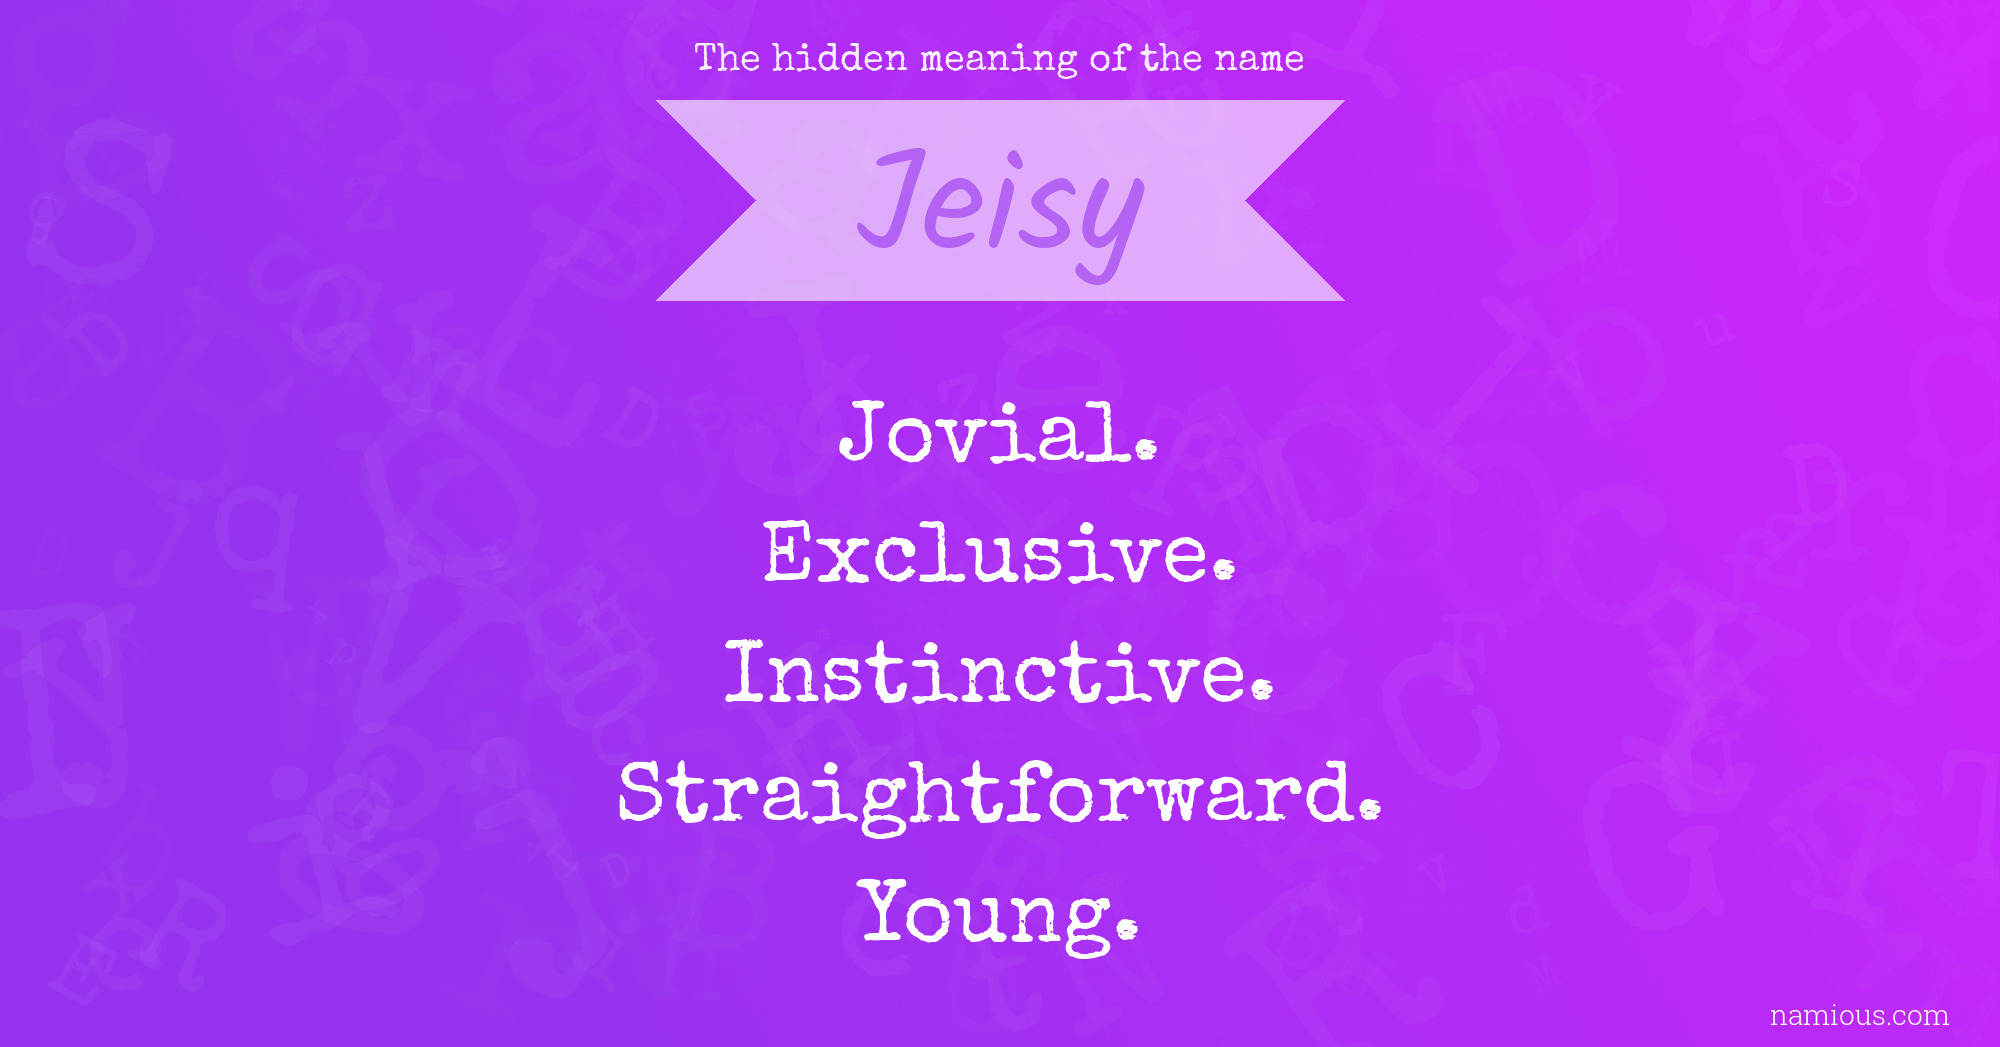 The hidden meaning of the name Jeisy